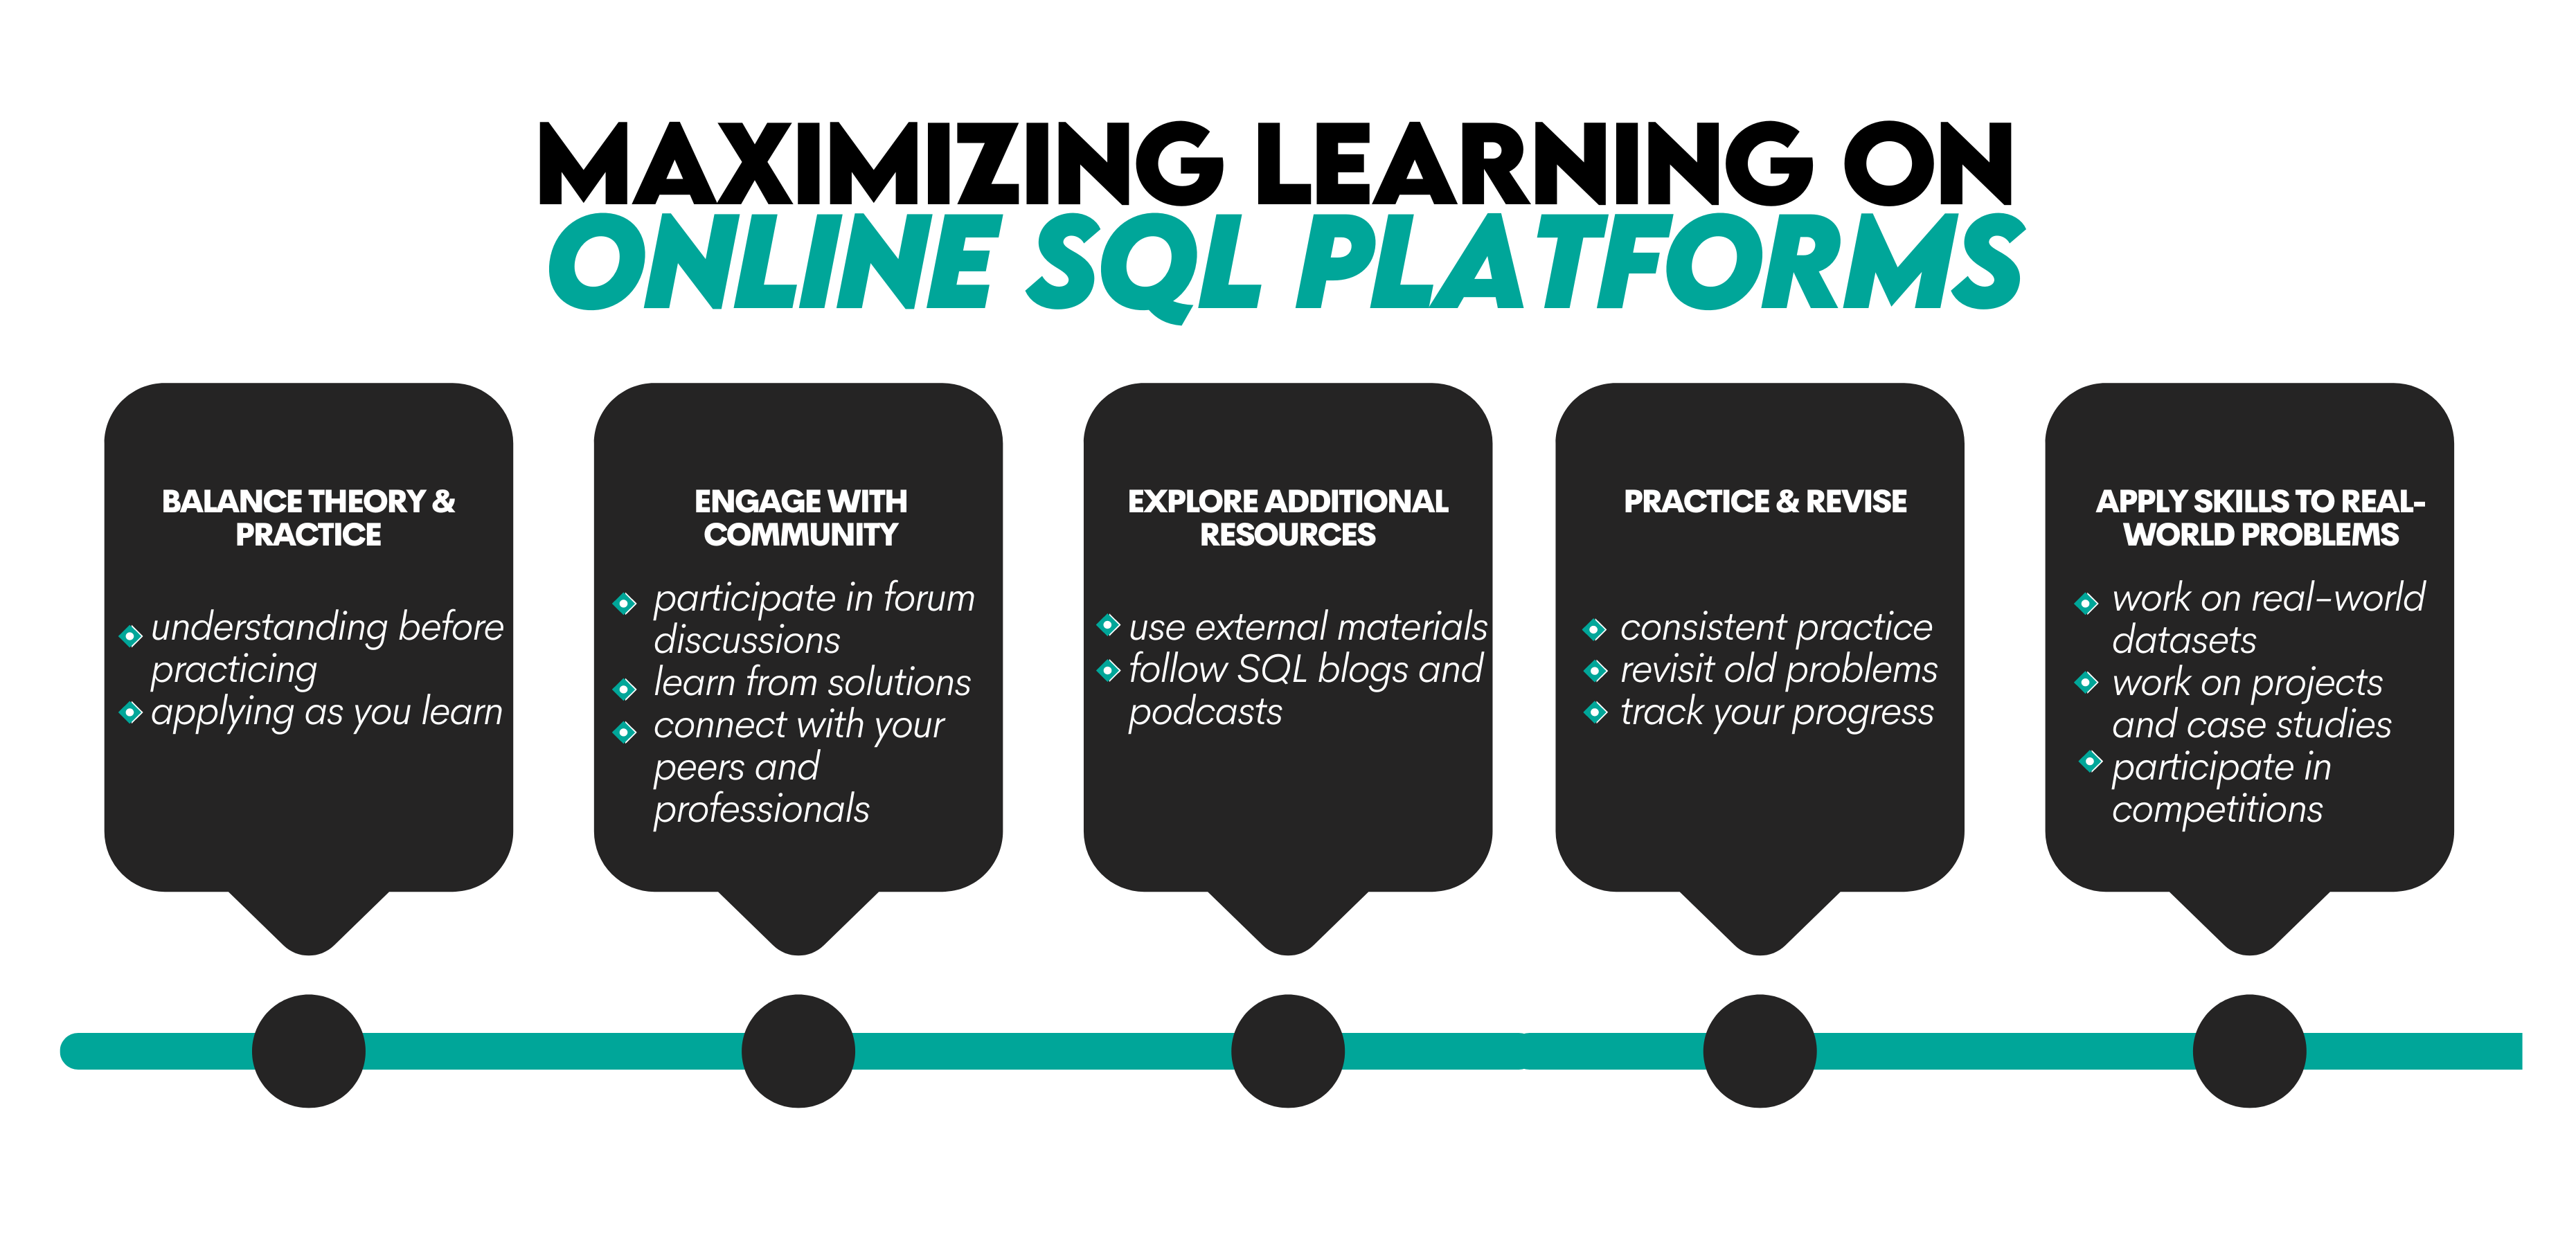 Tips to Maximize Learning on Online SQL Platforms